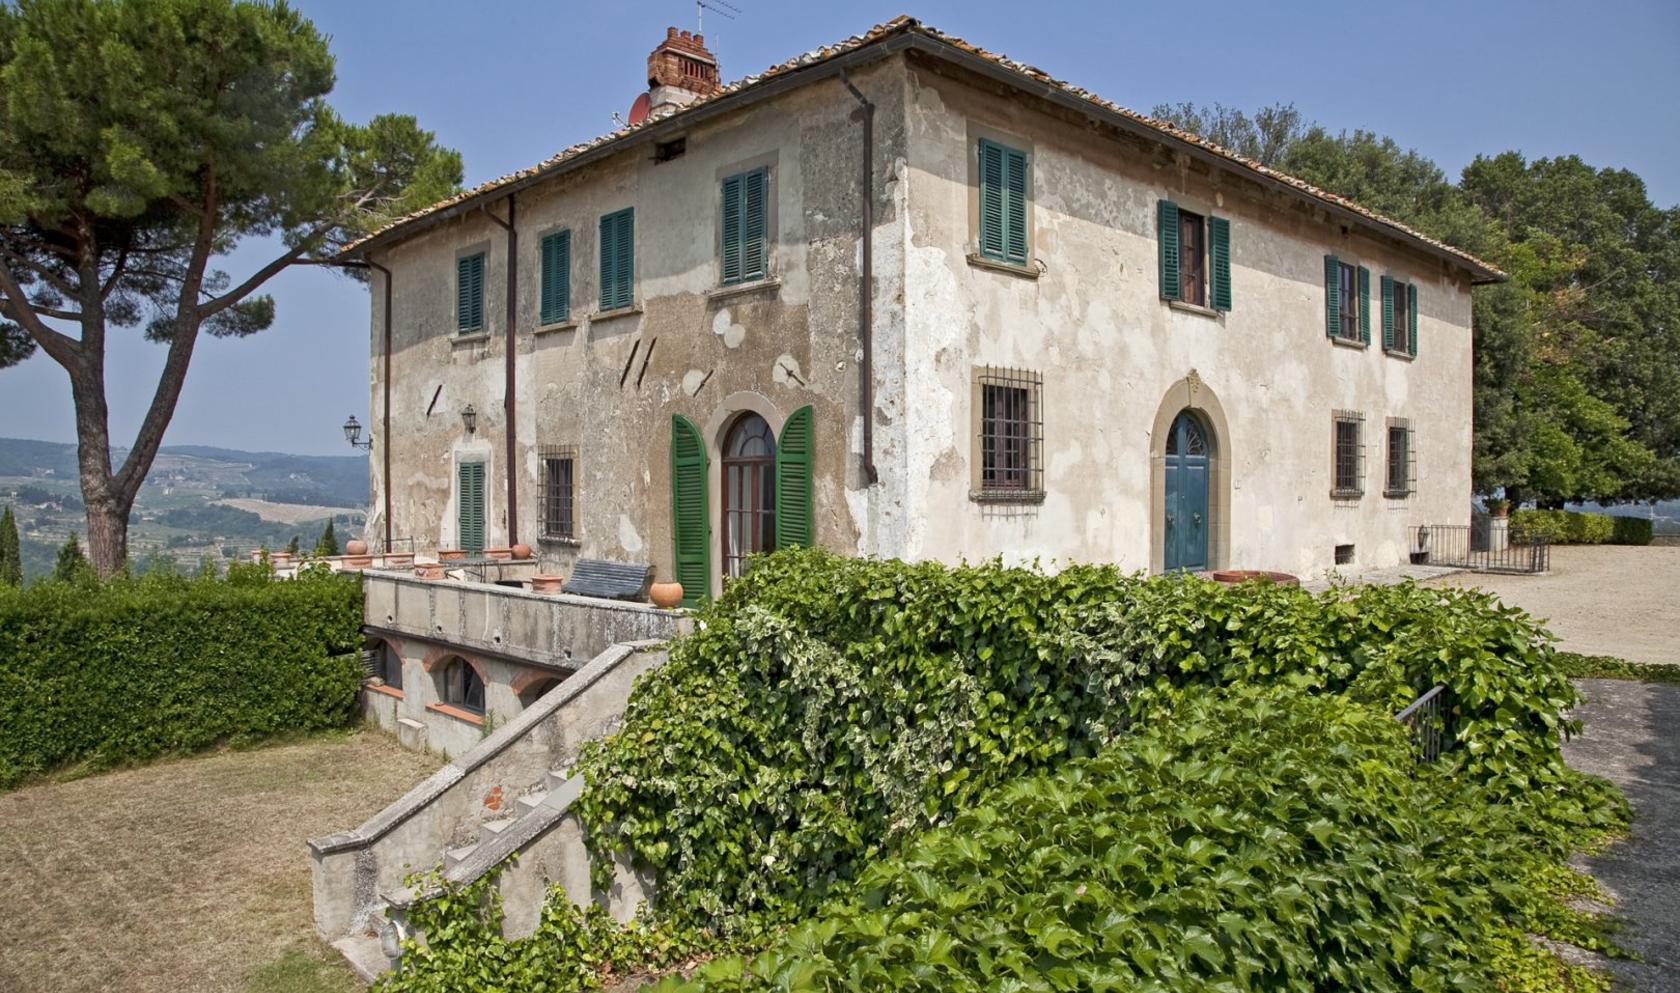 Toscana Immobiliare - The villa has a surface of about 900 sqm and it is spread over 3 floors, plus the basement of the year 1000.